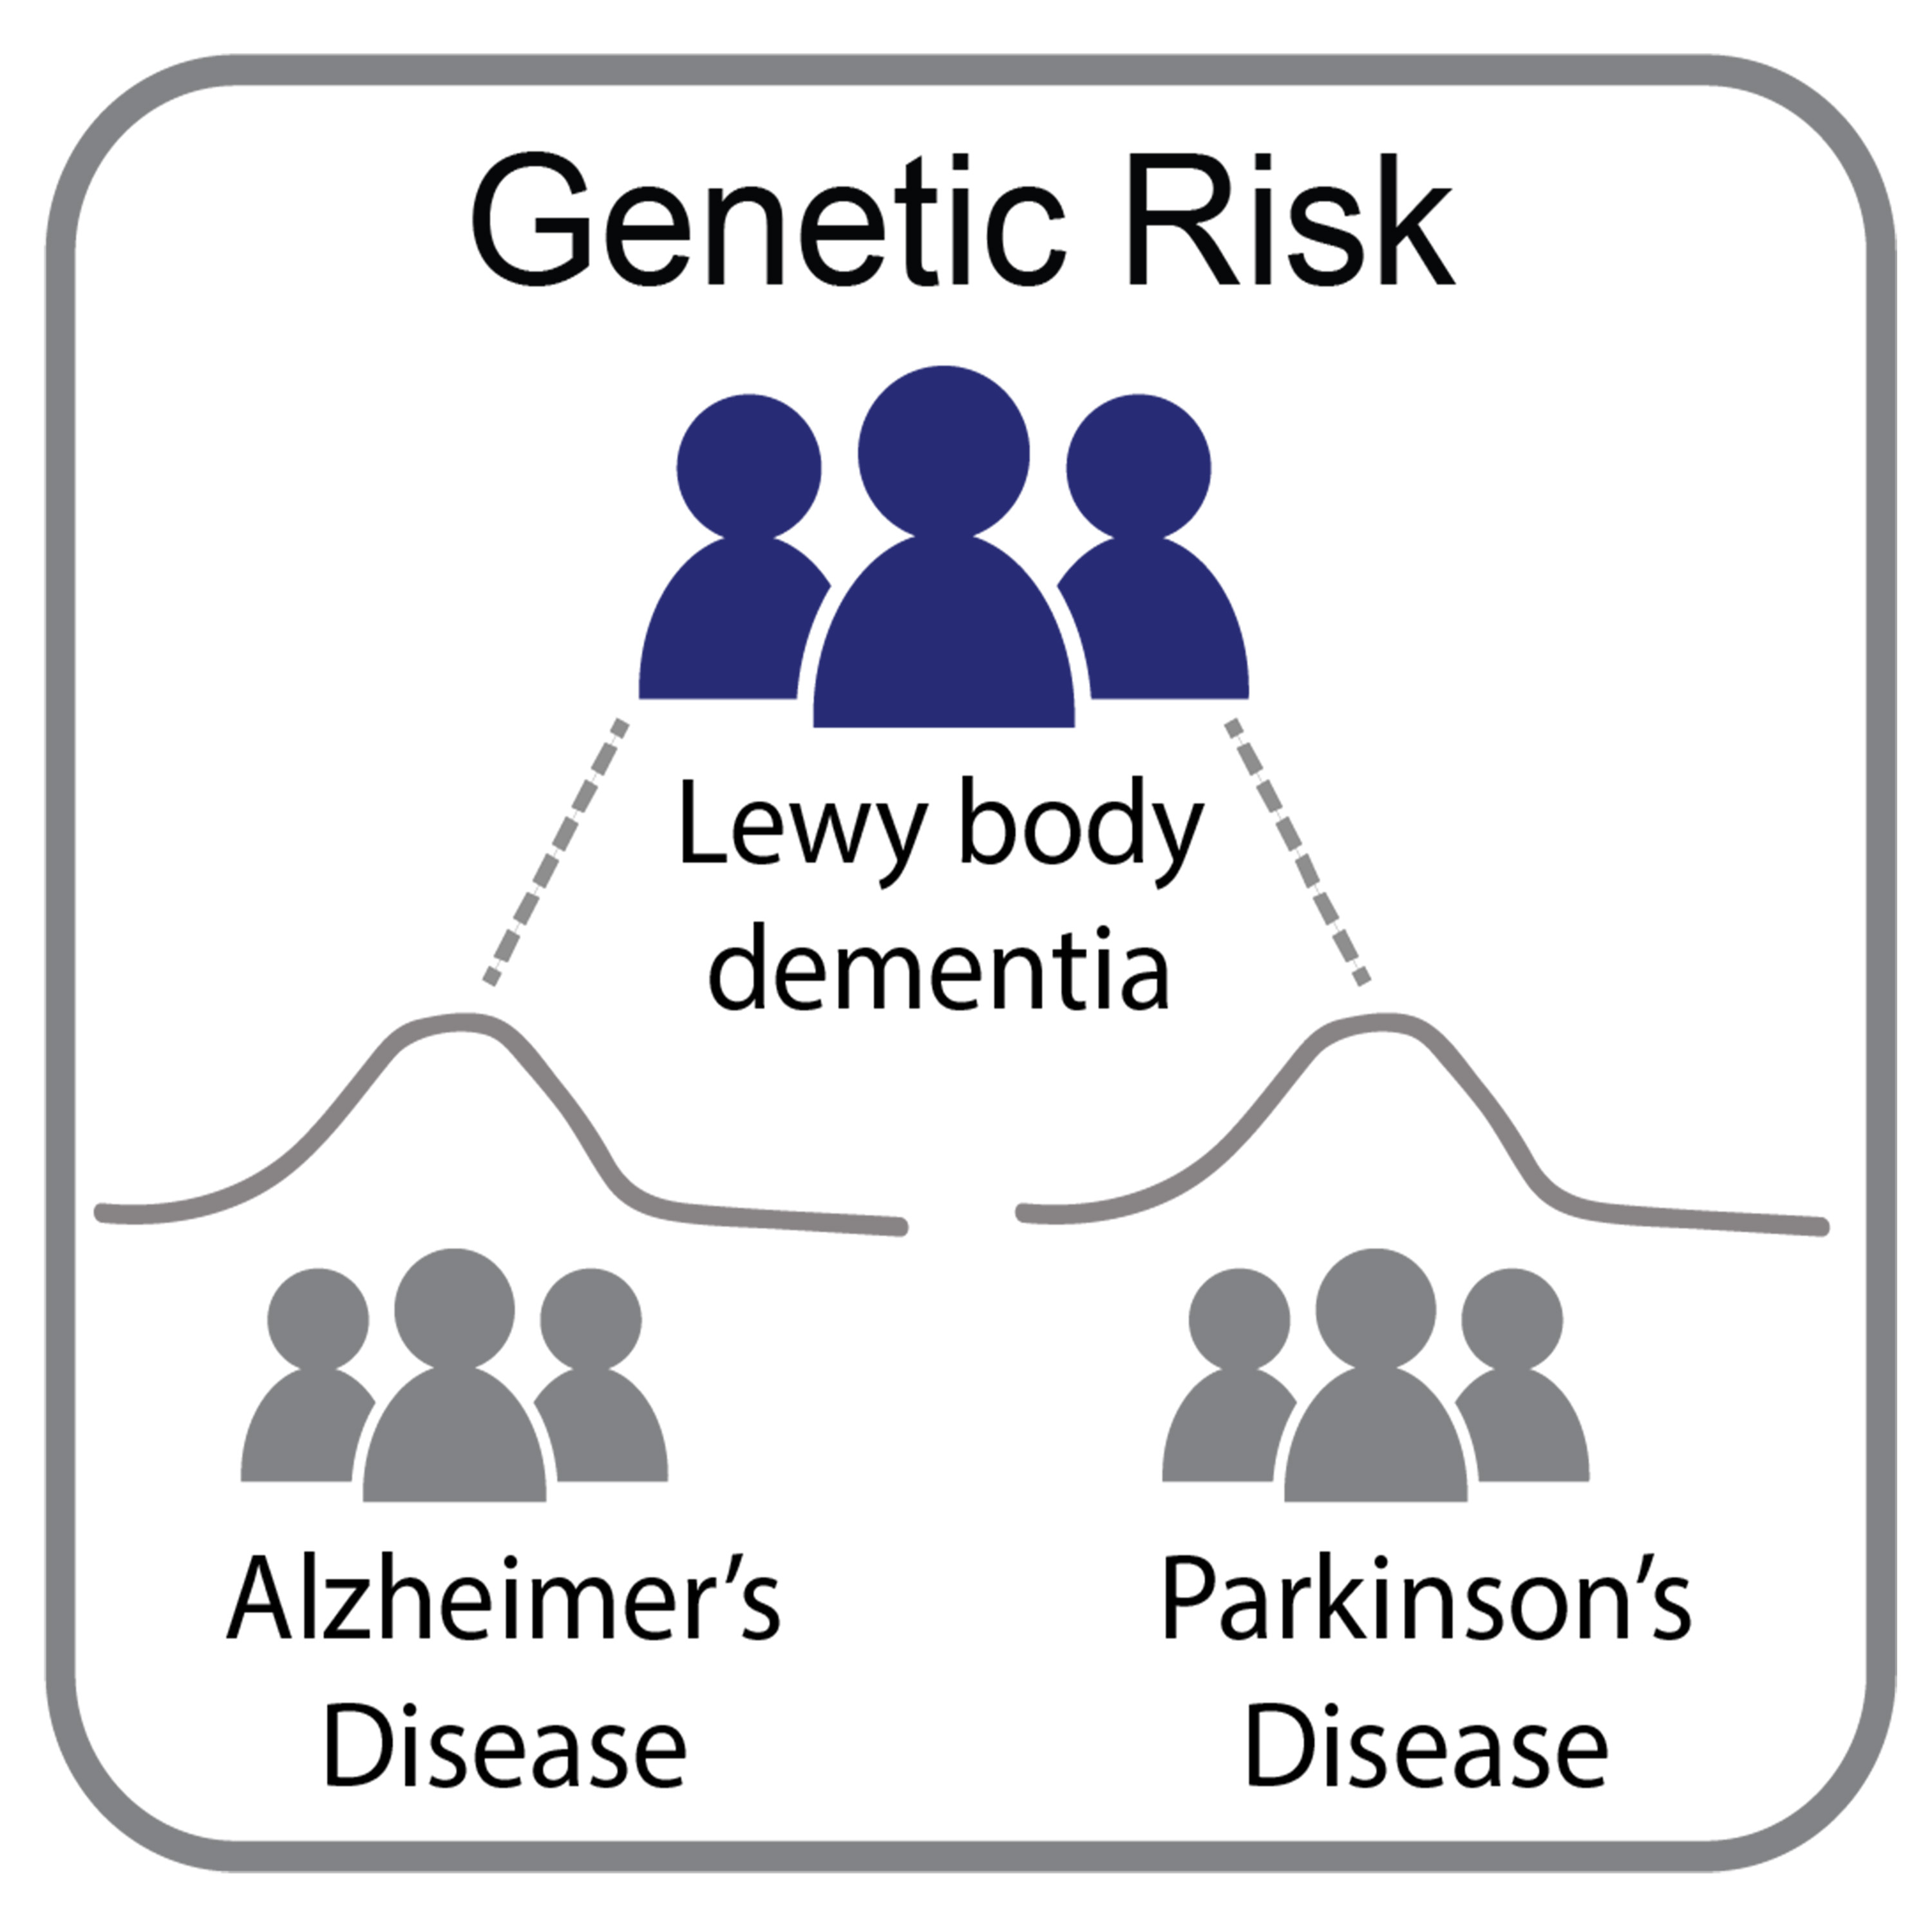 The genetic study of Lewy body dementia supports the links with Alzheimer’s and Parkinson’s diseases